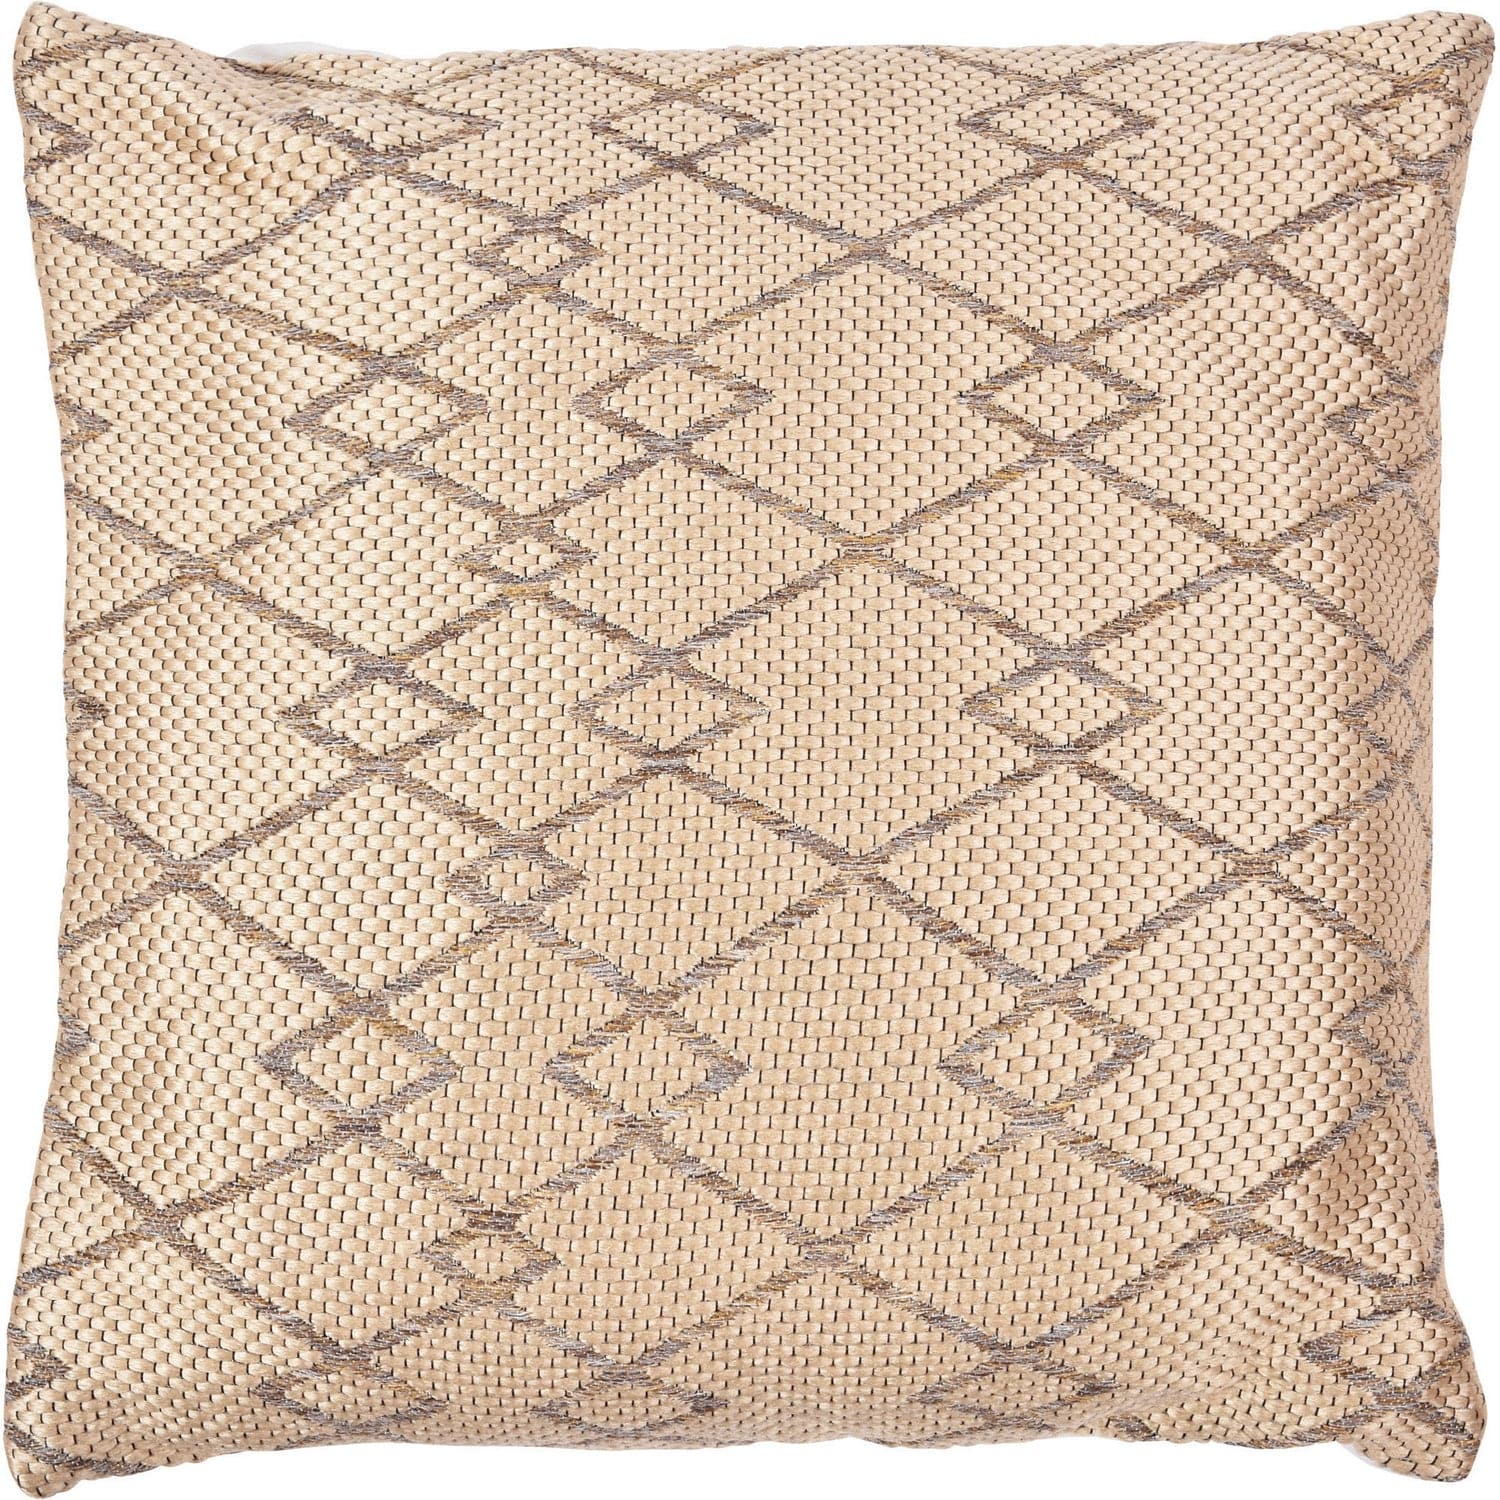 Renwil - PWFLX1019 - Home Accents - Rugs/Pillows/Blankets